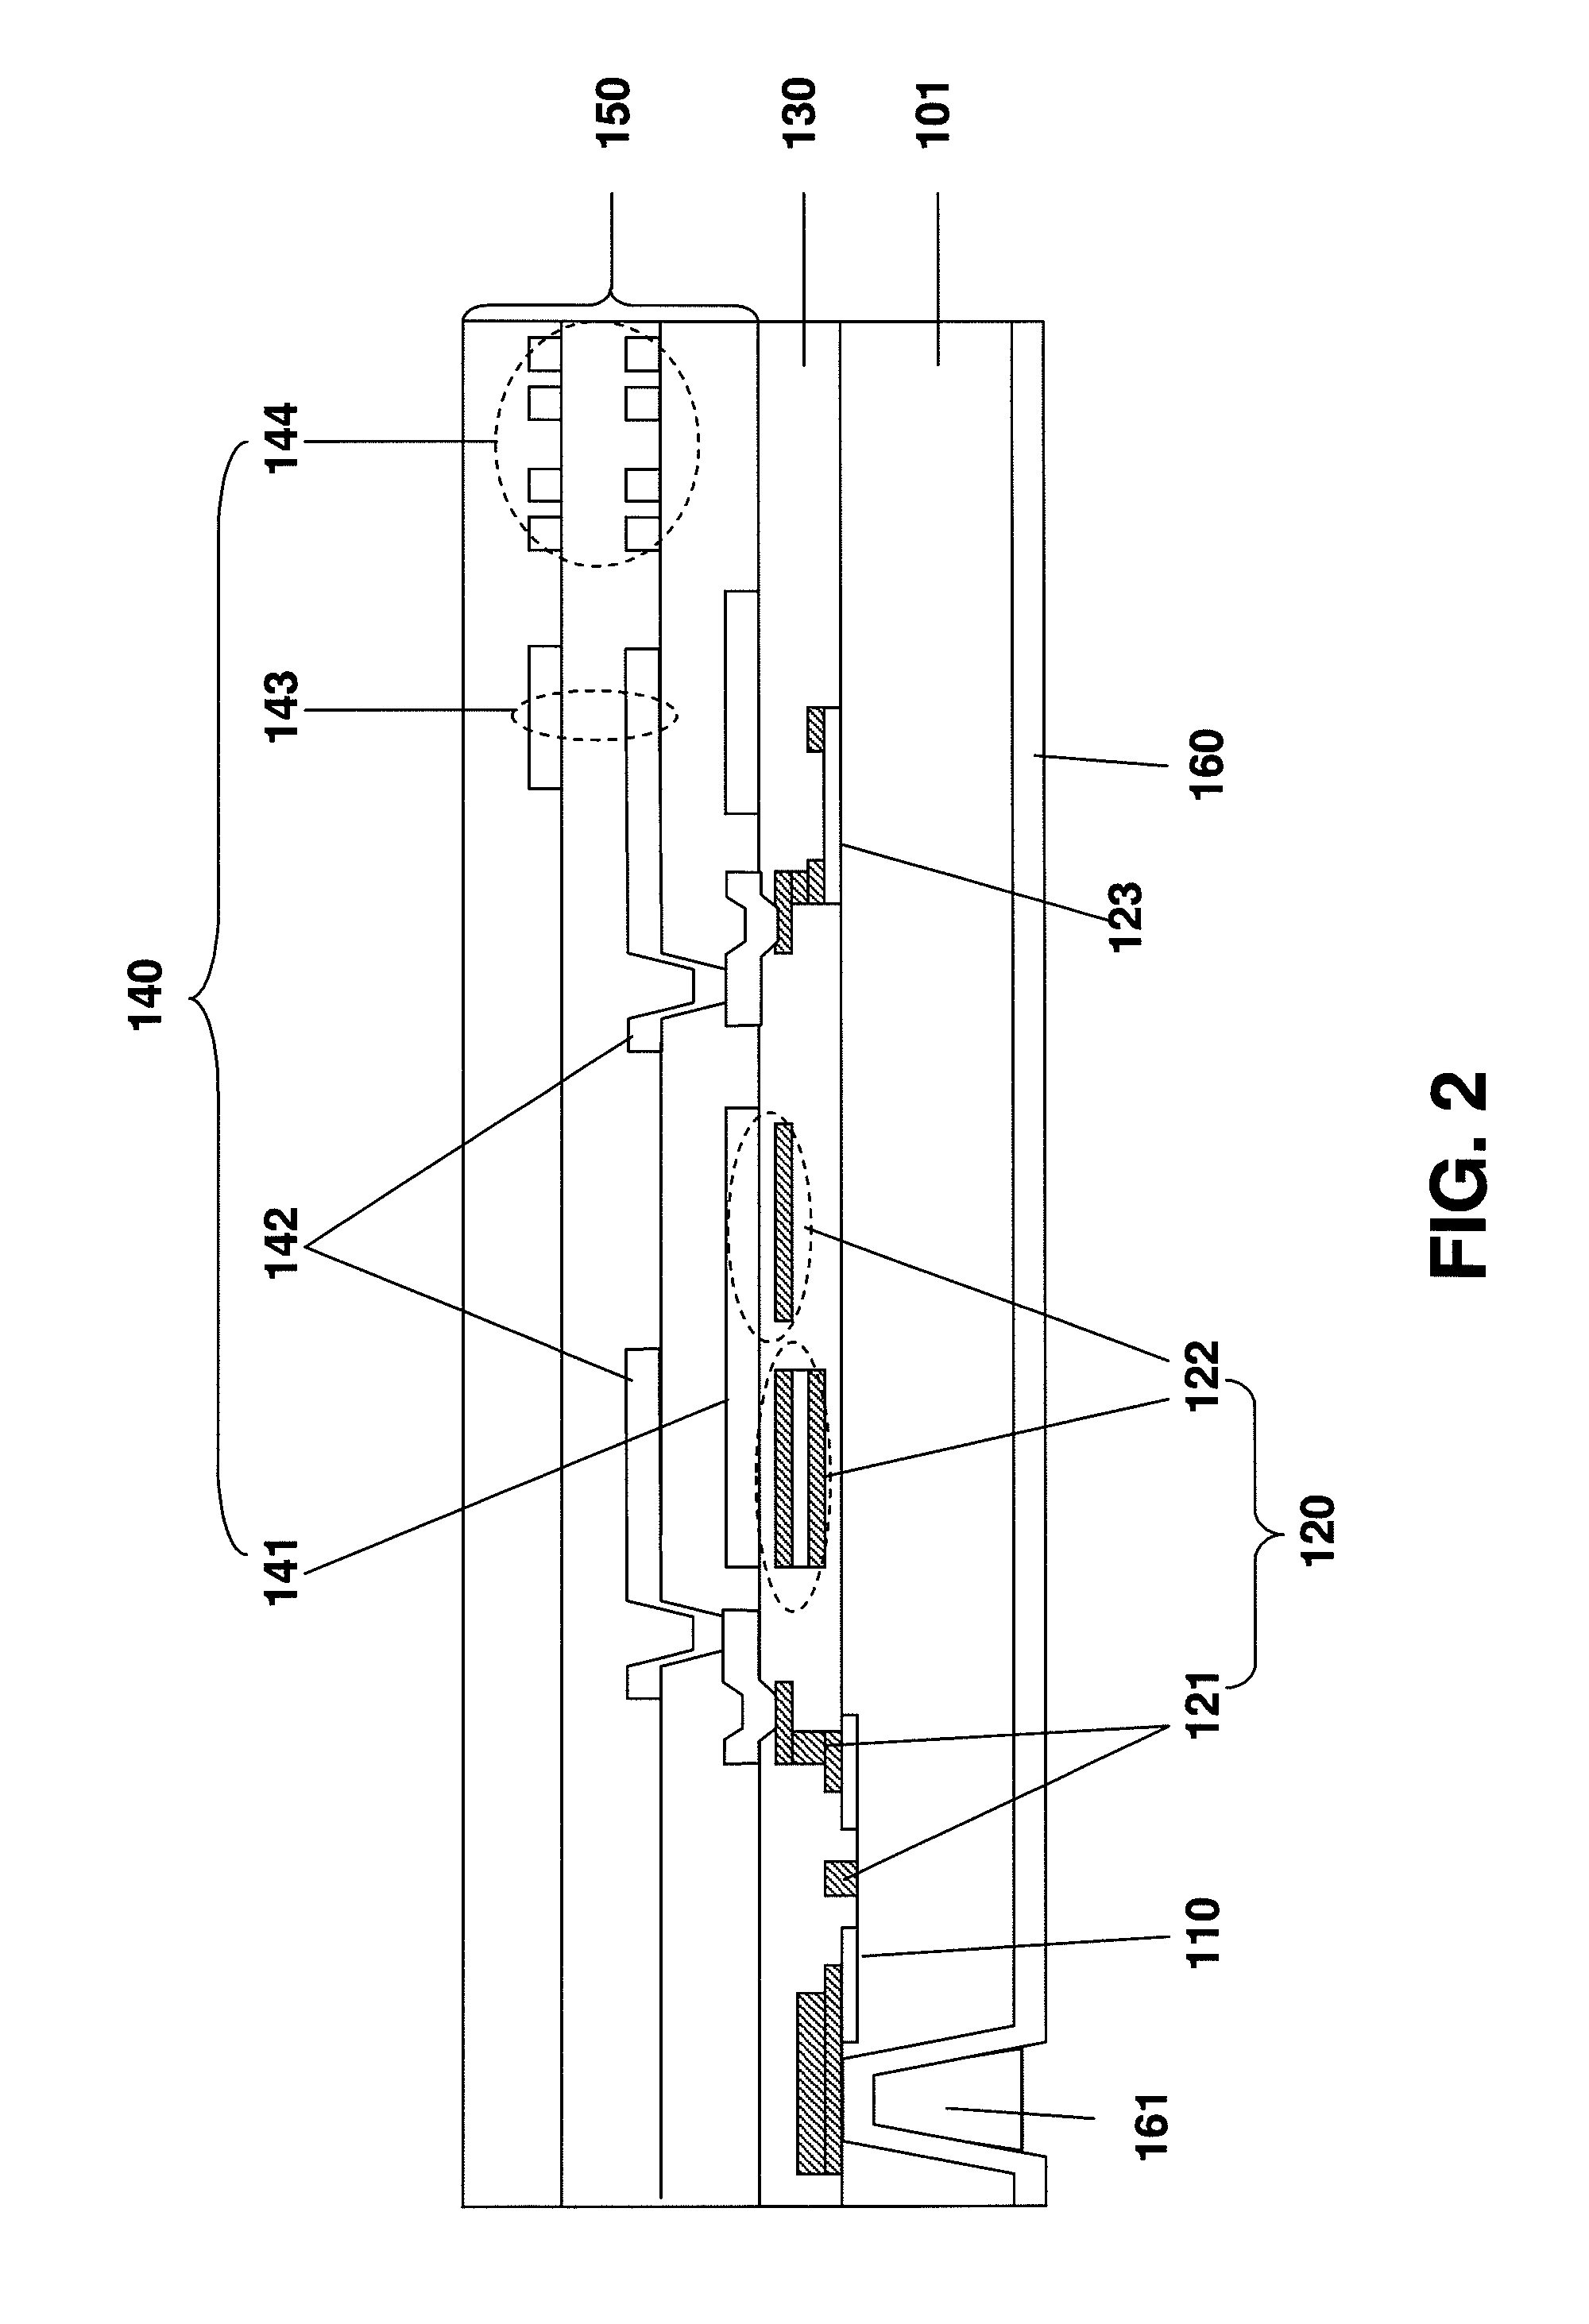 Compound semiconductor integrated circuit